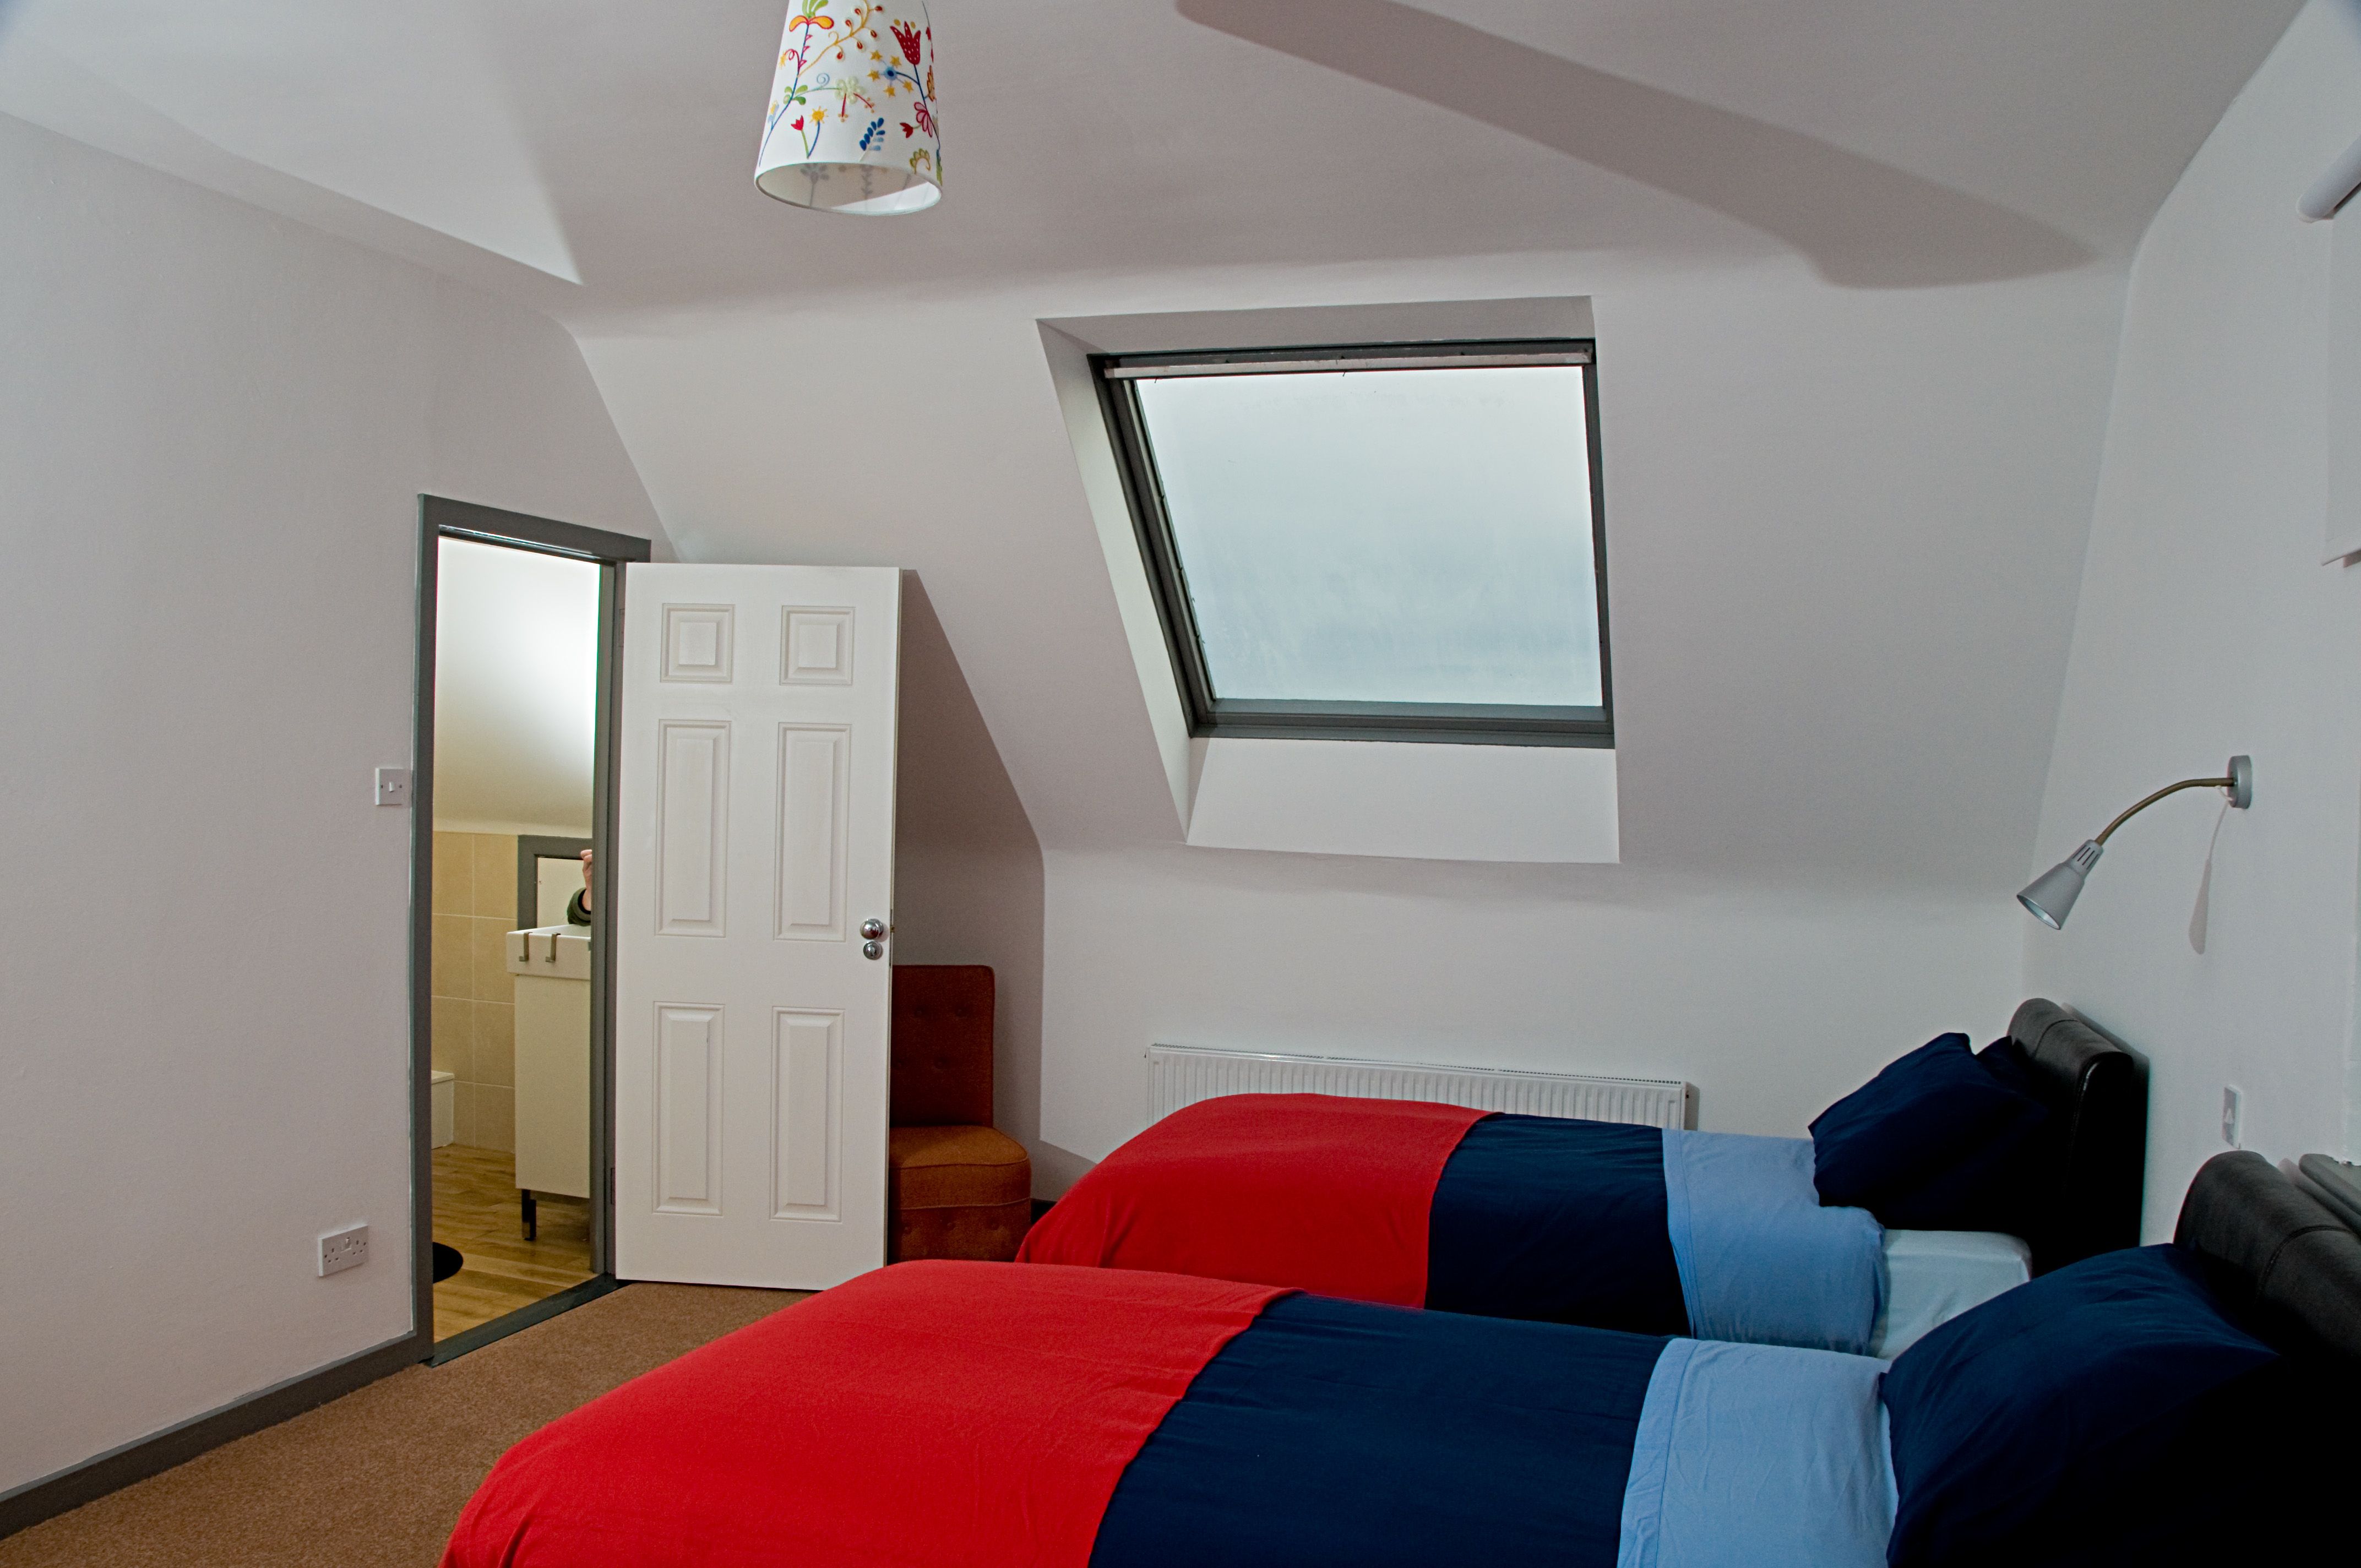 A bedroom at the Old Deanery Cottages, Killala.